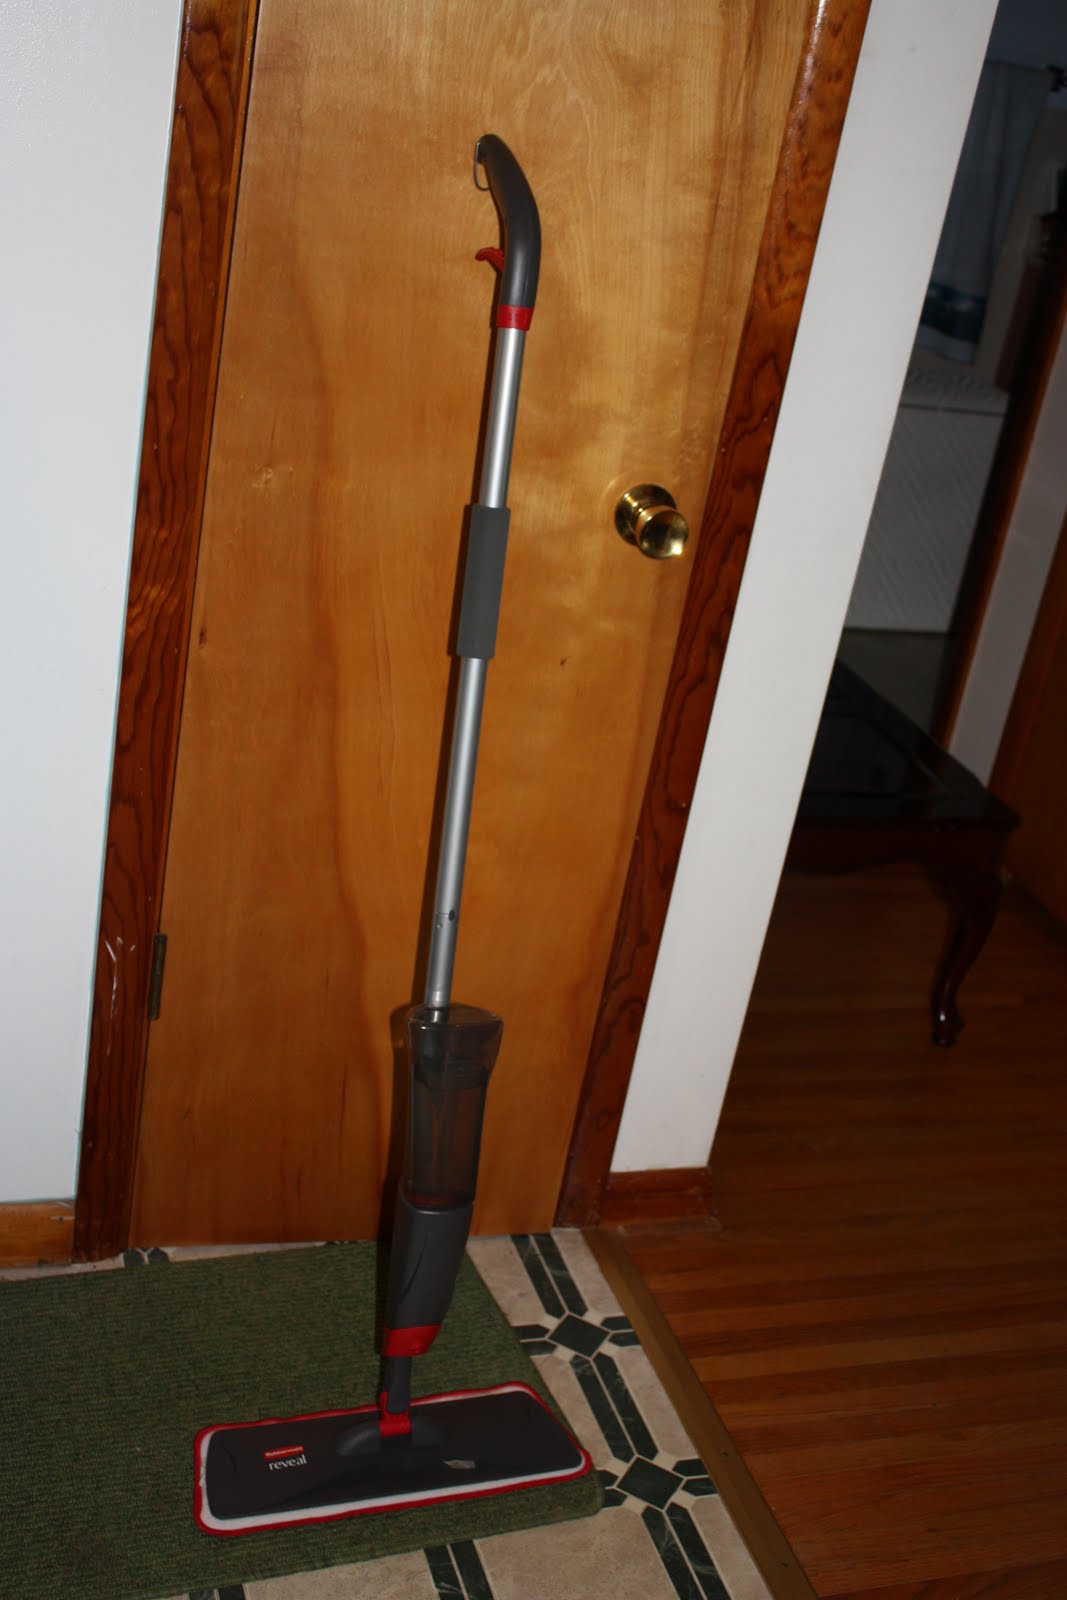 At The Fence Rubbermaid Reveal Spray Mop Review And Giveaway